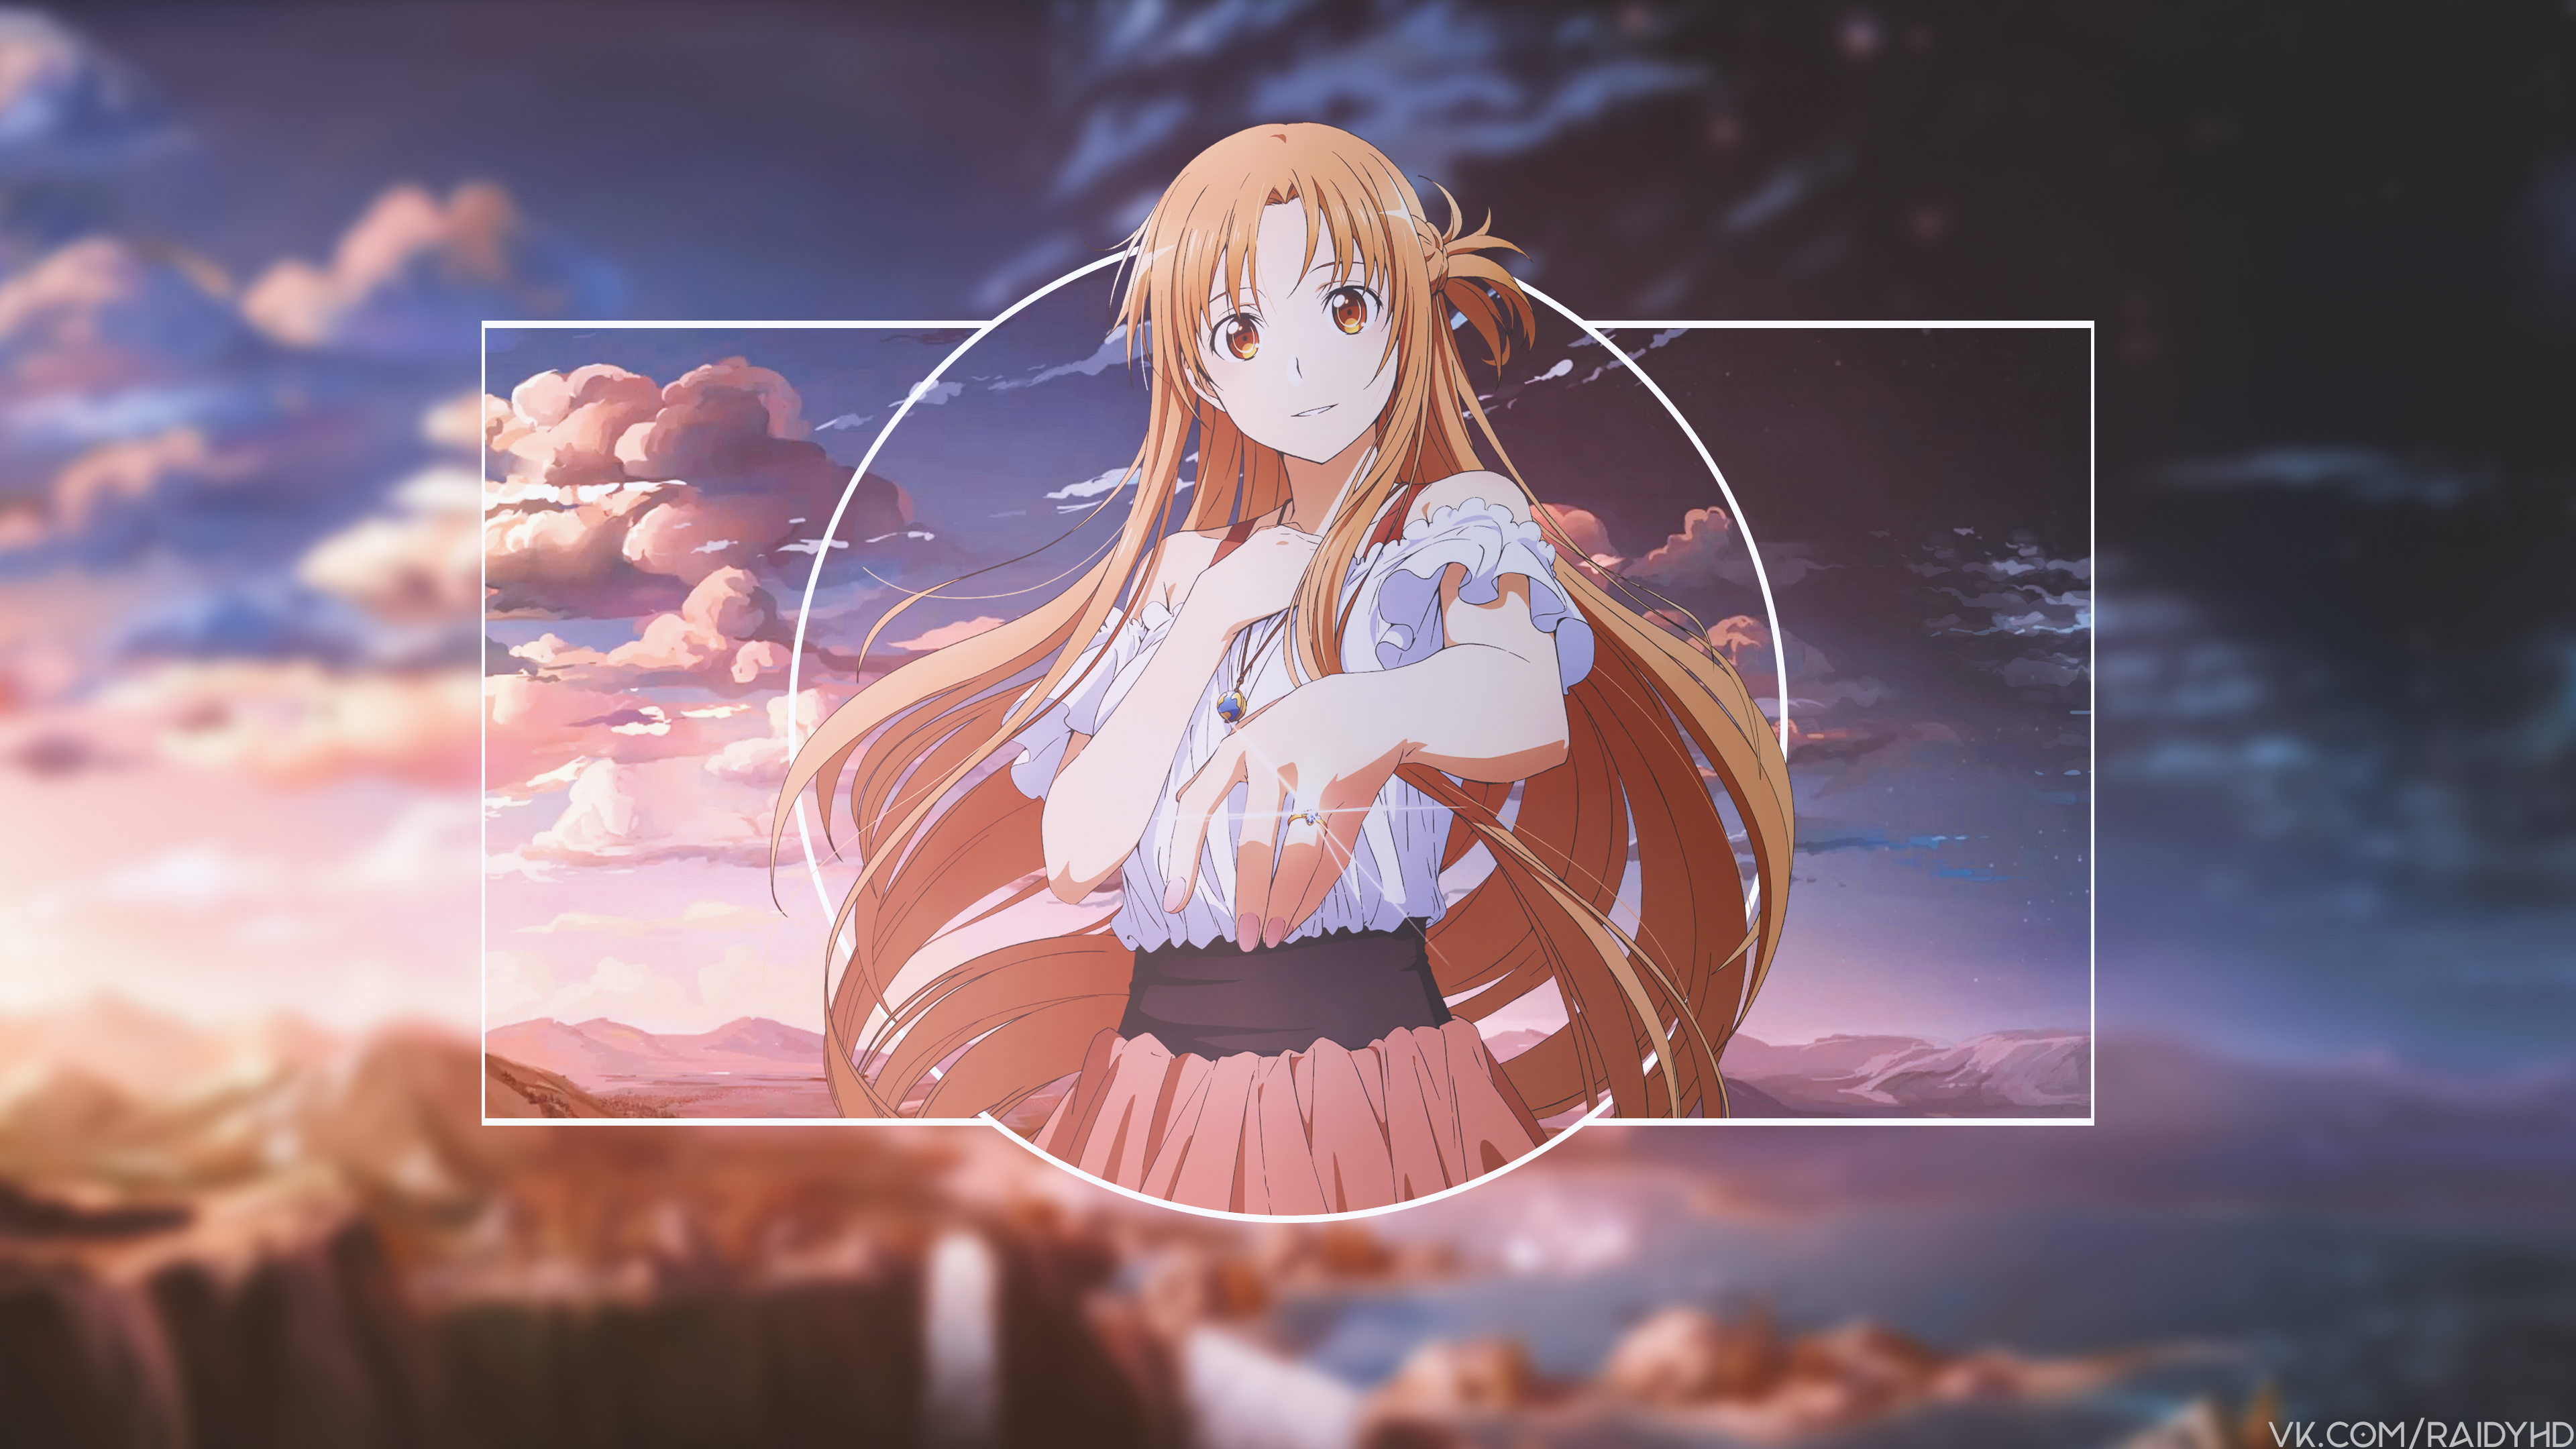 Anime 3840x2160 anime girls anime picture-in-picture Sword Art Online watermarked